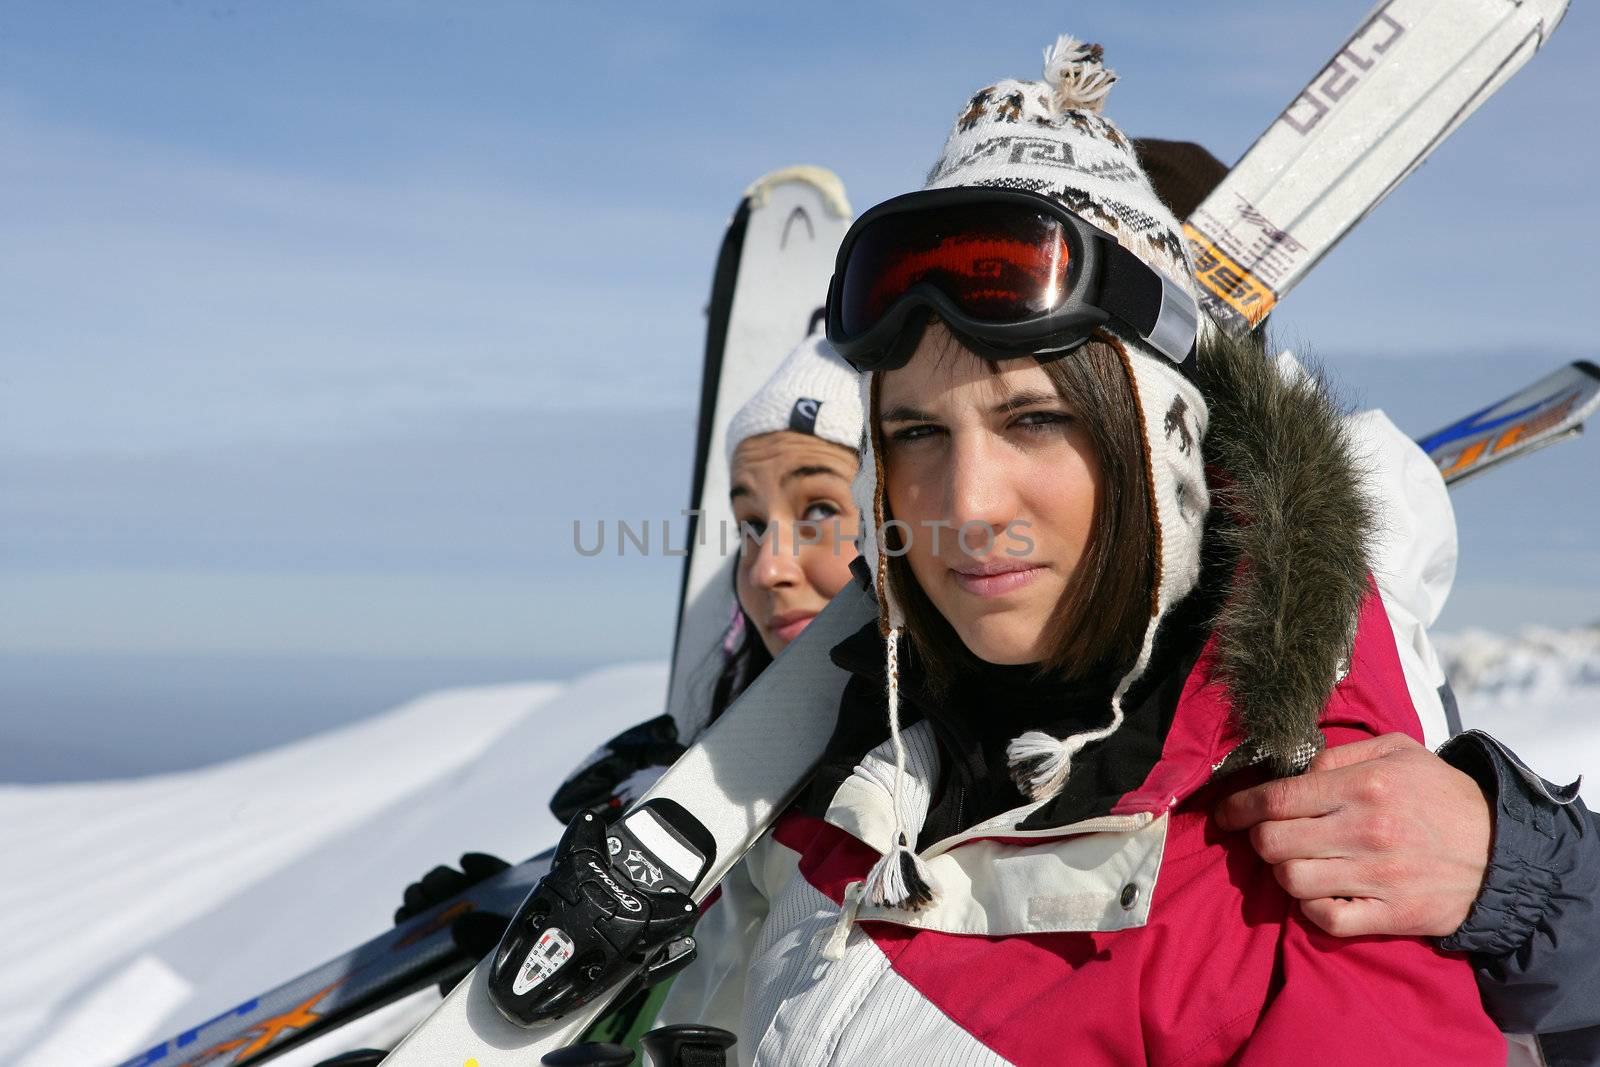 Two woman having a good time on skiing holiday by phovoir